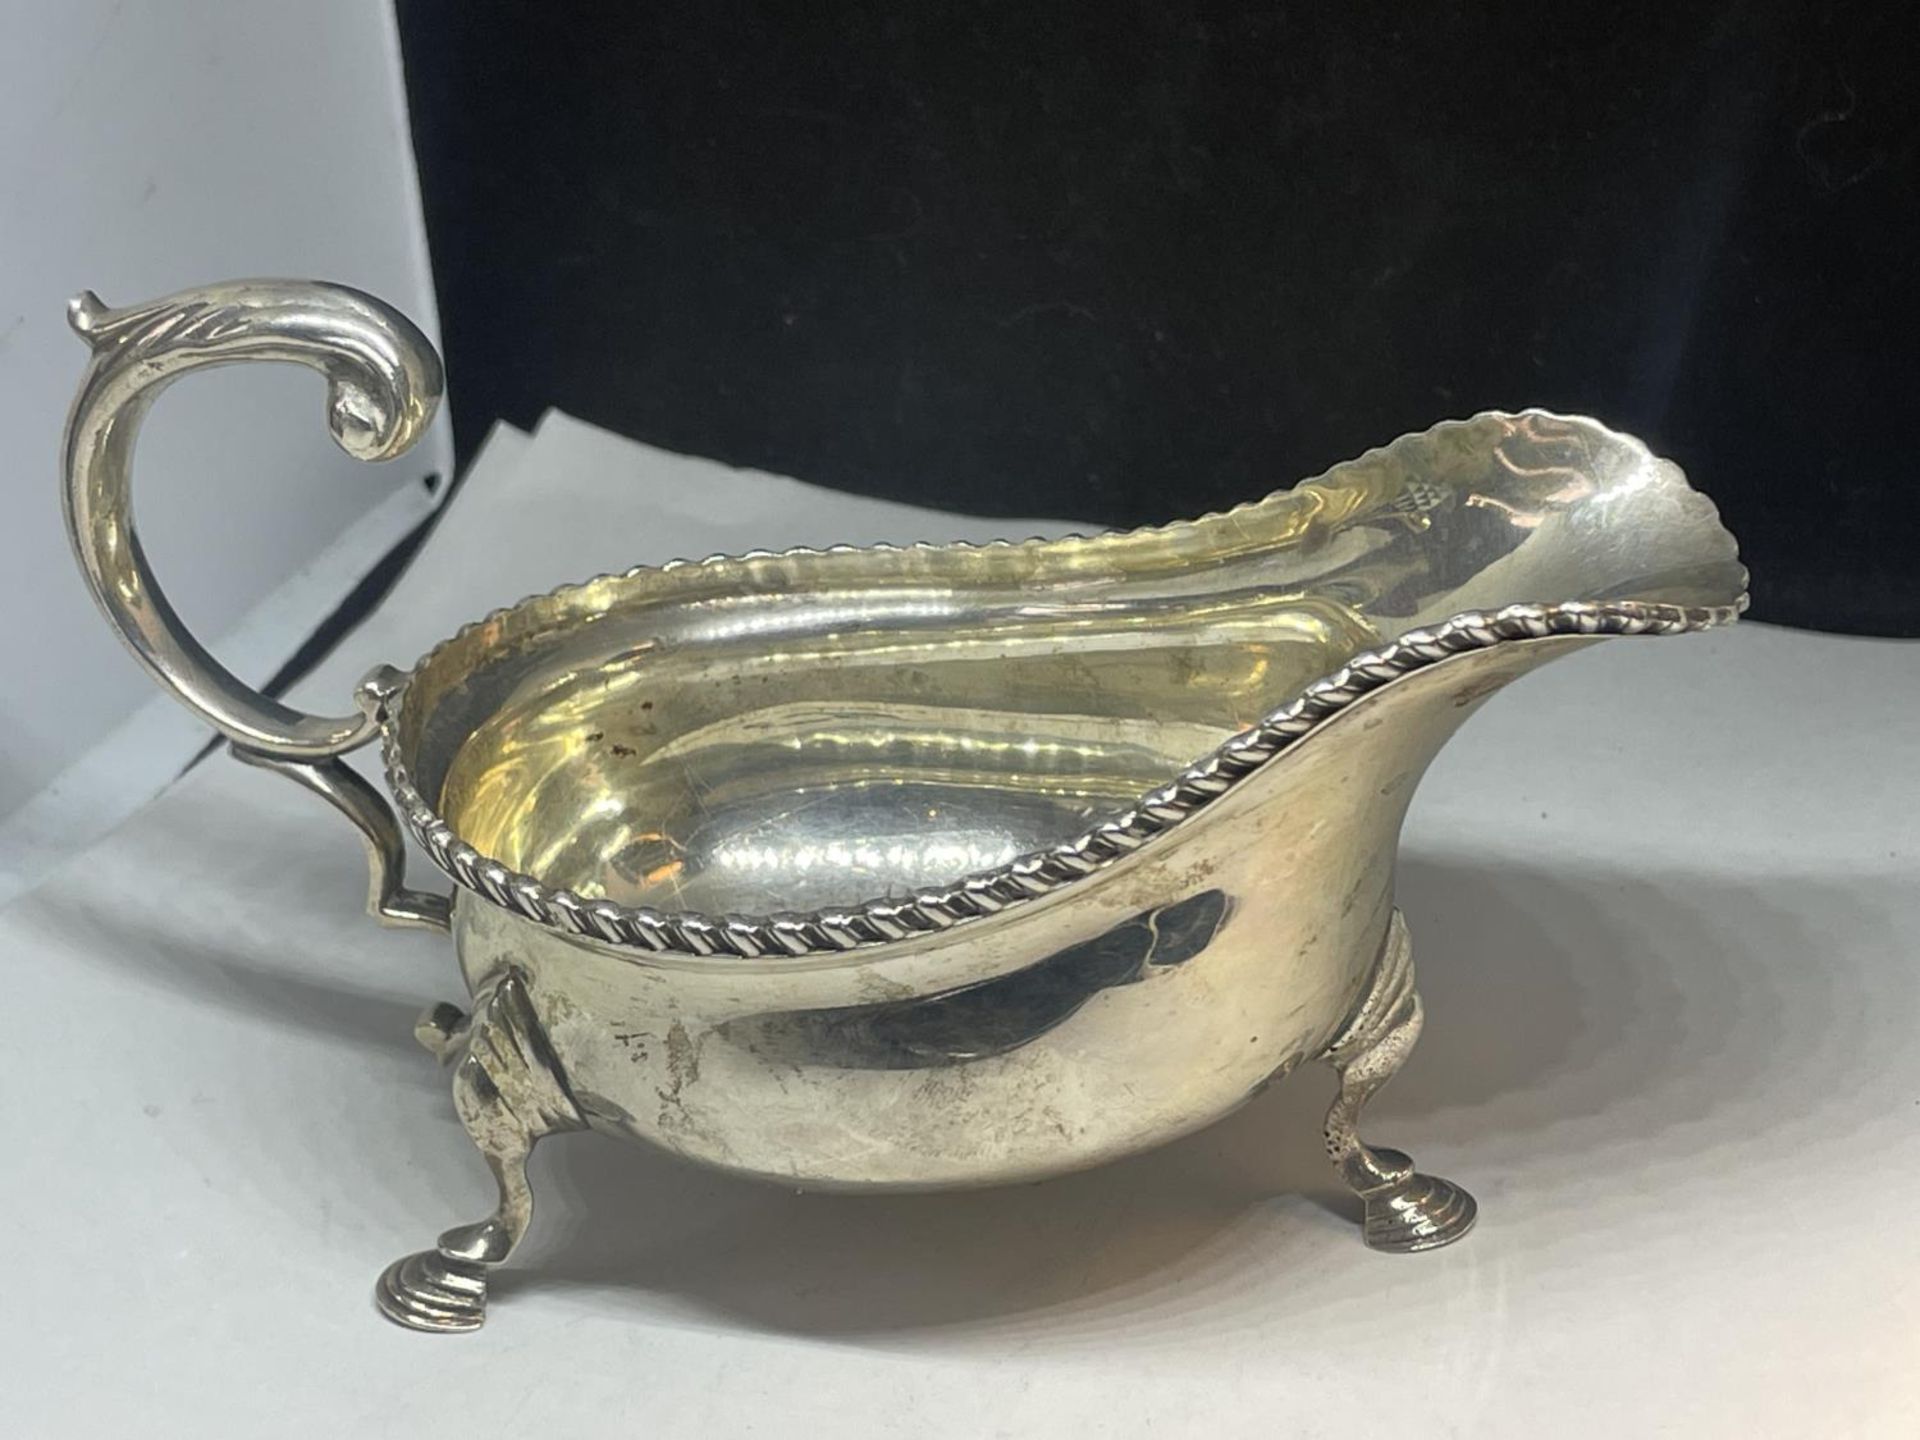 A BOODLE AND DUNTHORNE HALLMARKED CHESTER SILVER SAUCE BOAT GROSS WEIGHT 145.1 GRAMS